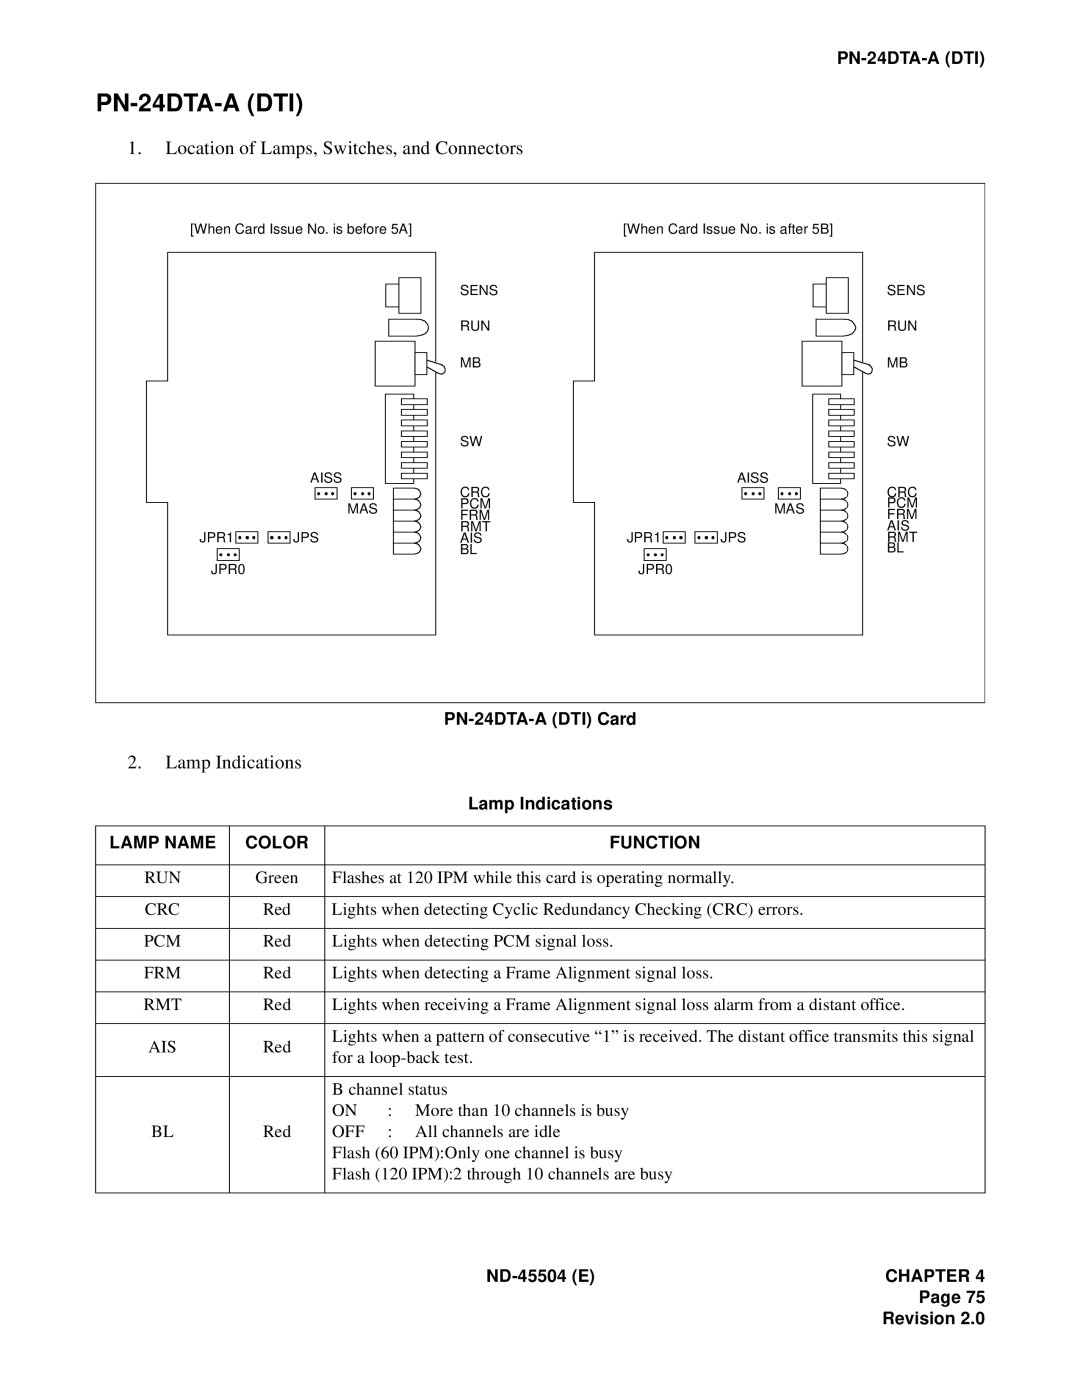 NEC 2000 IVS manual Location of Lamps, Switches, and Connectors, Lamp Indications, PN-24DTA-ADTI Card, Lamp Name, Color 